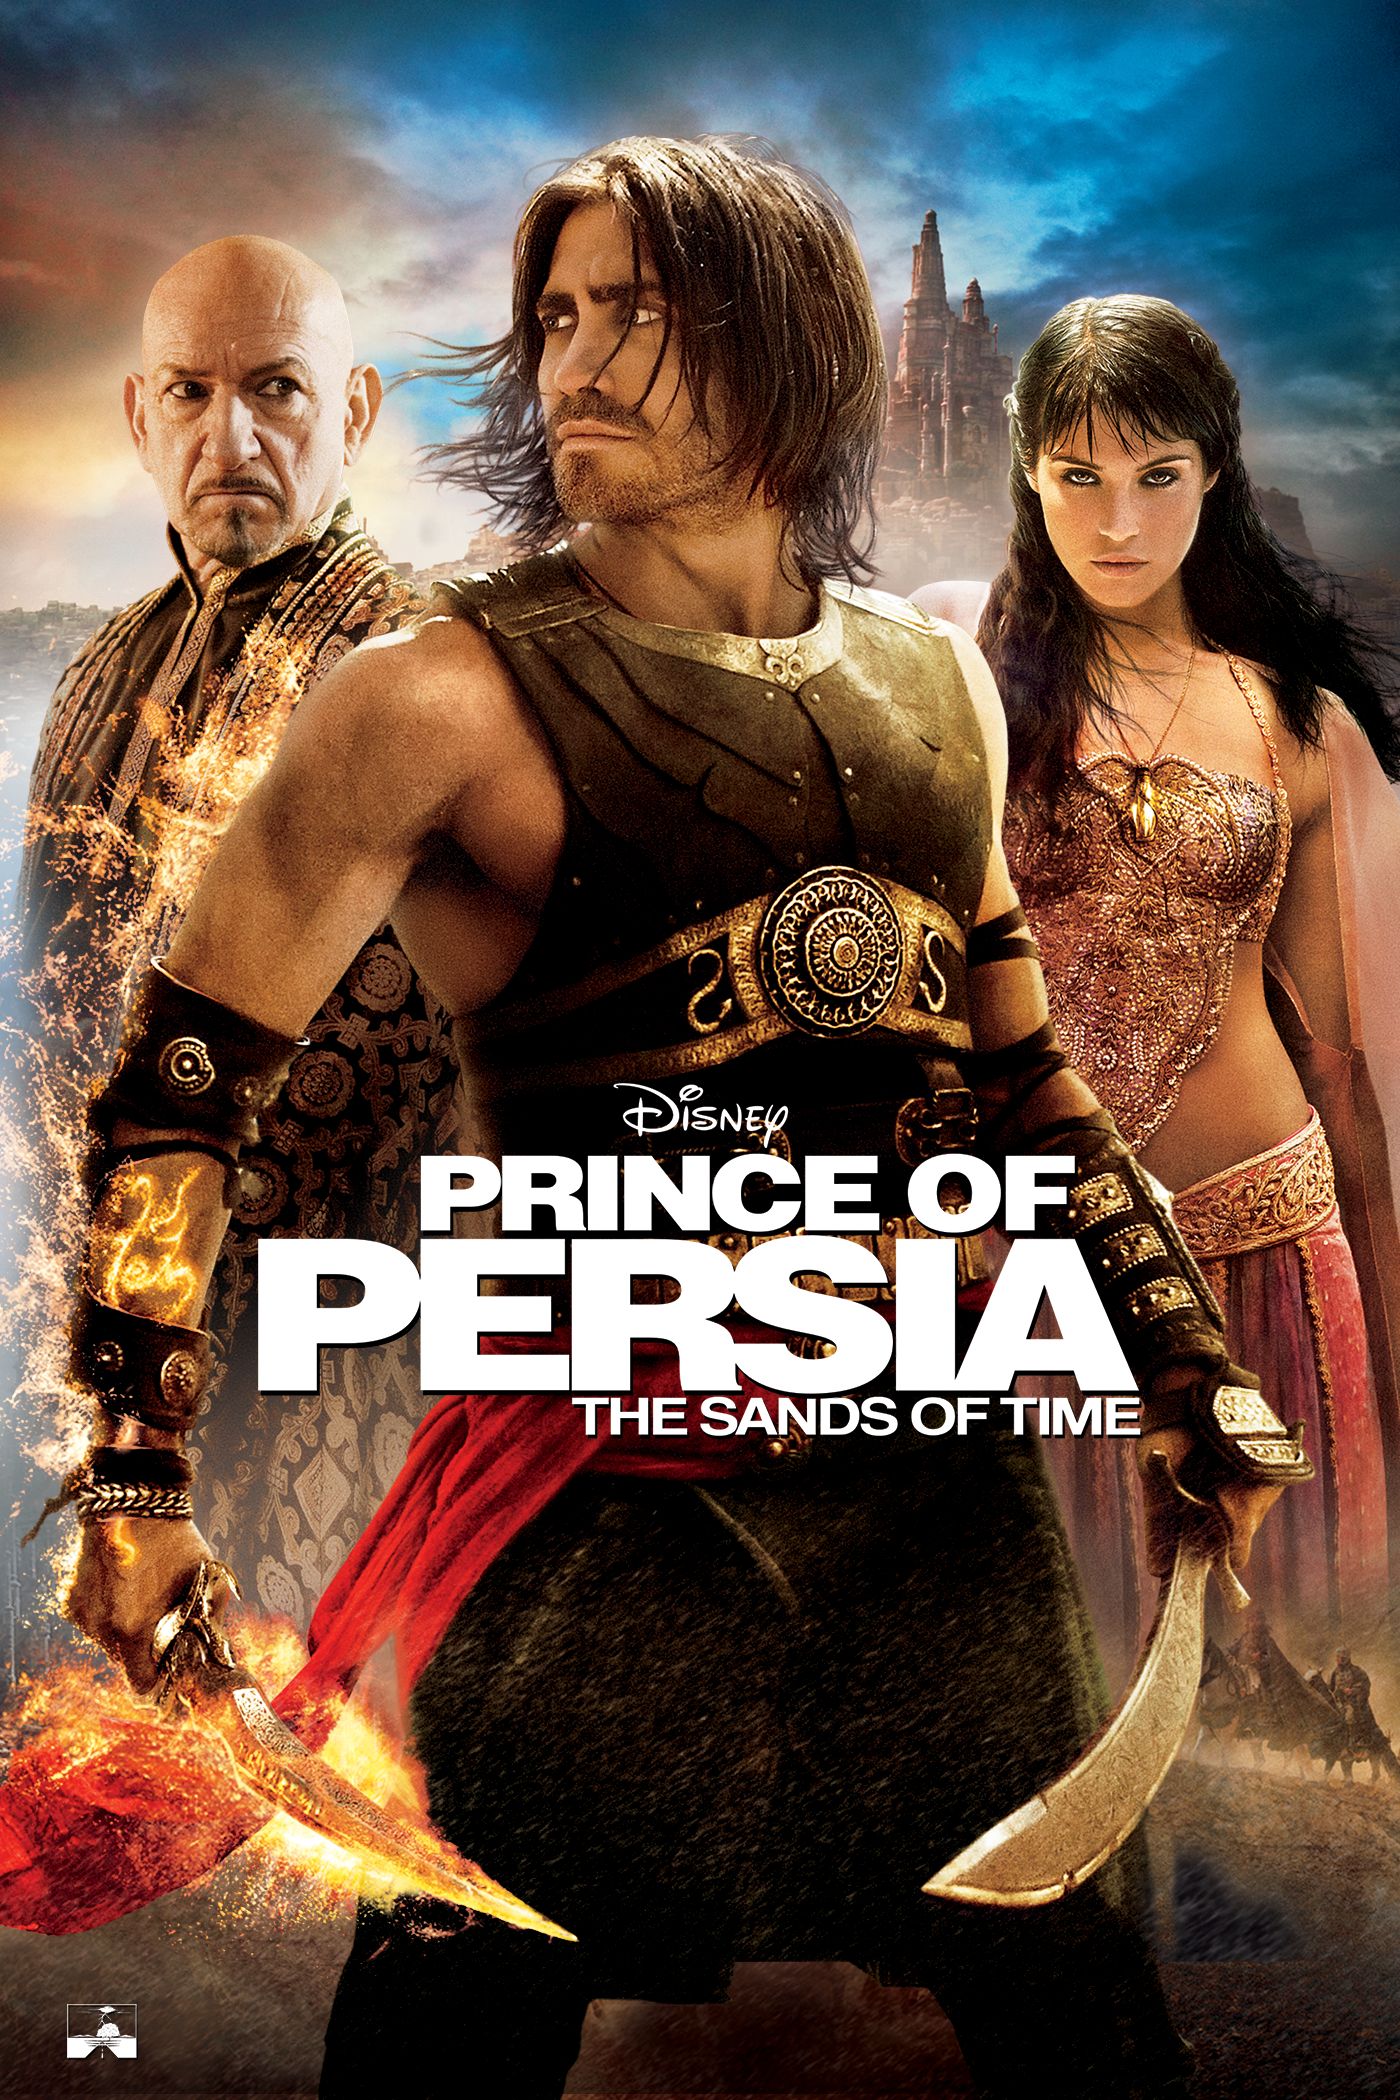 Prince of Persia: The Sands of Time - Rotten Tomatoes